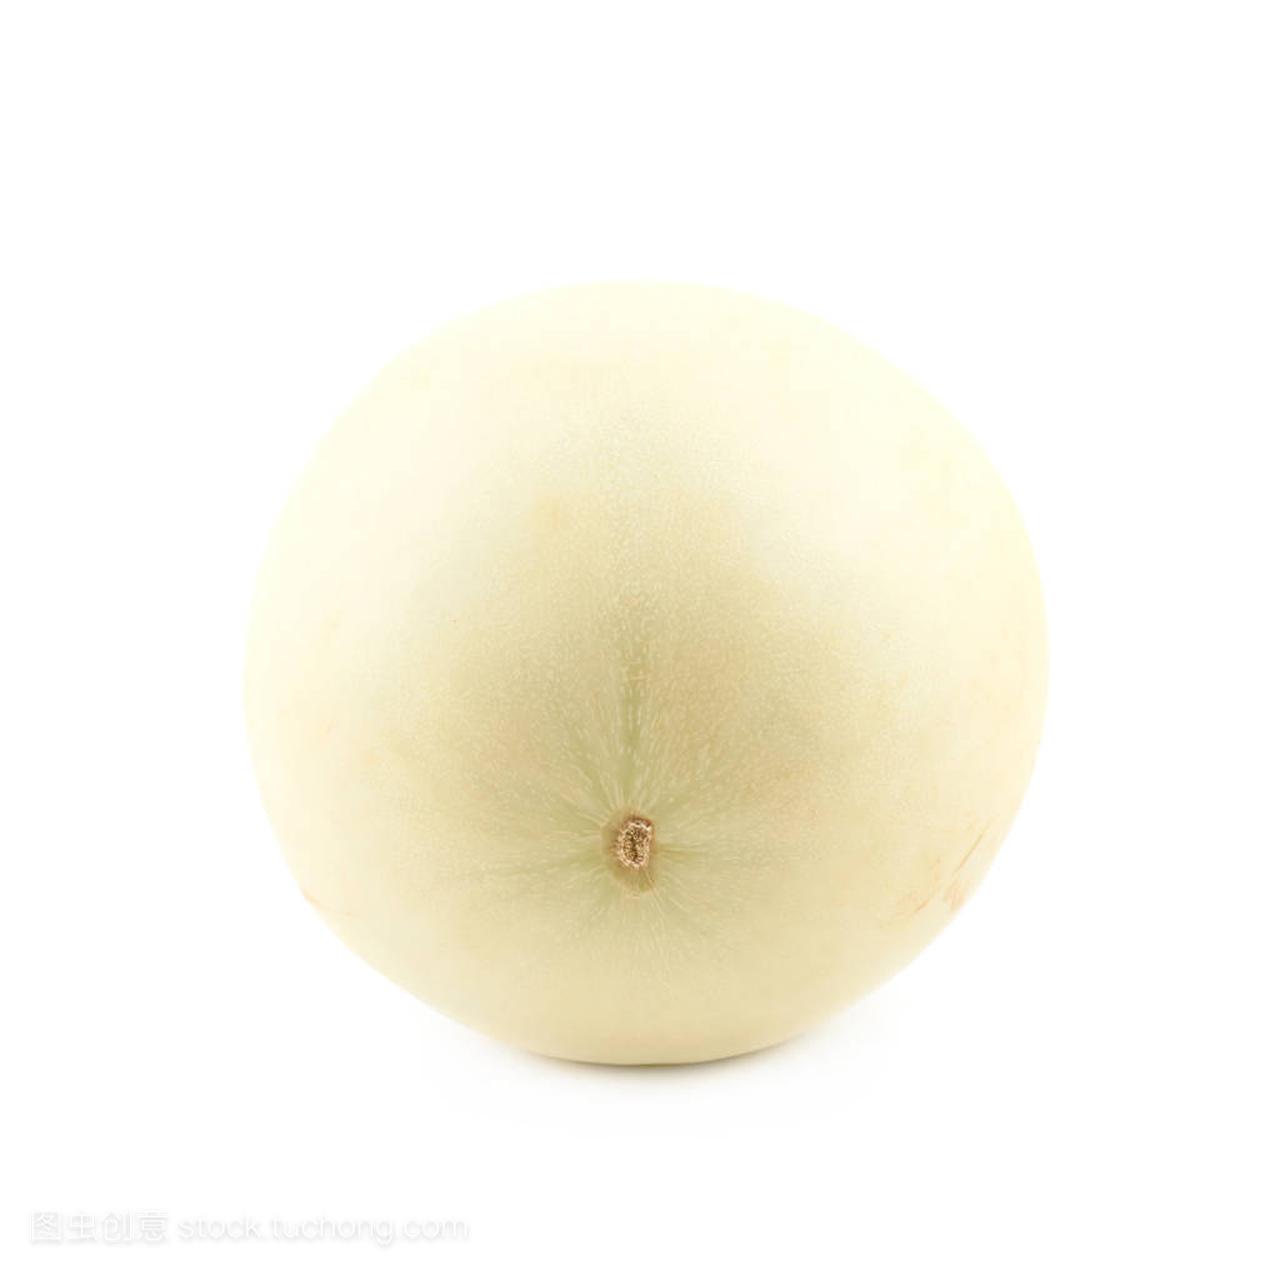 Honeydew melon composition isolated